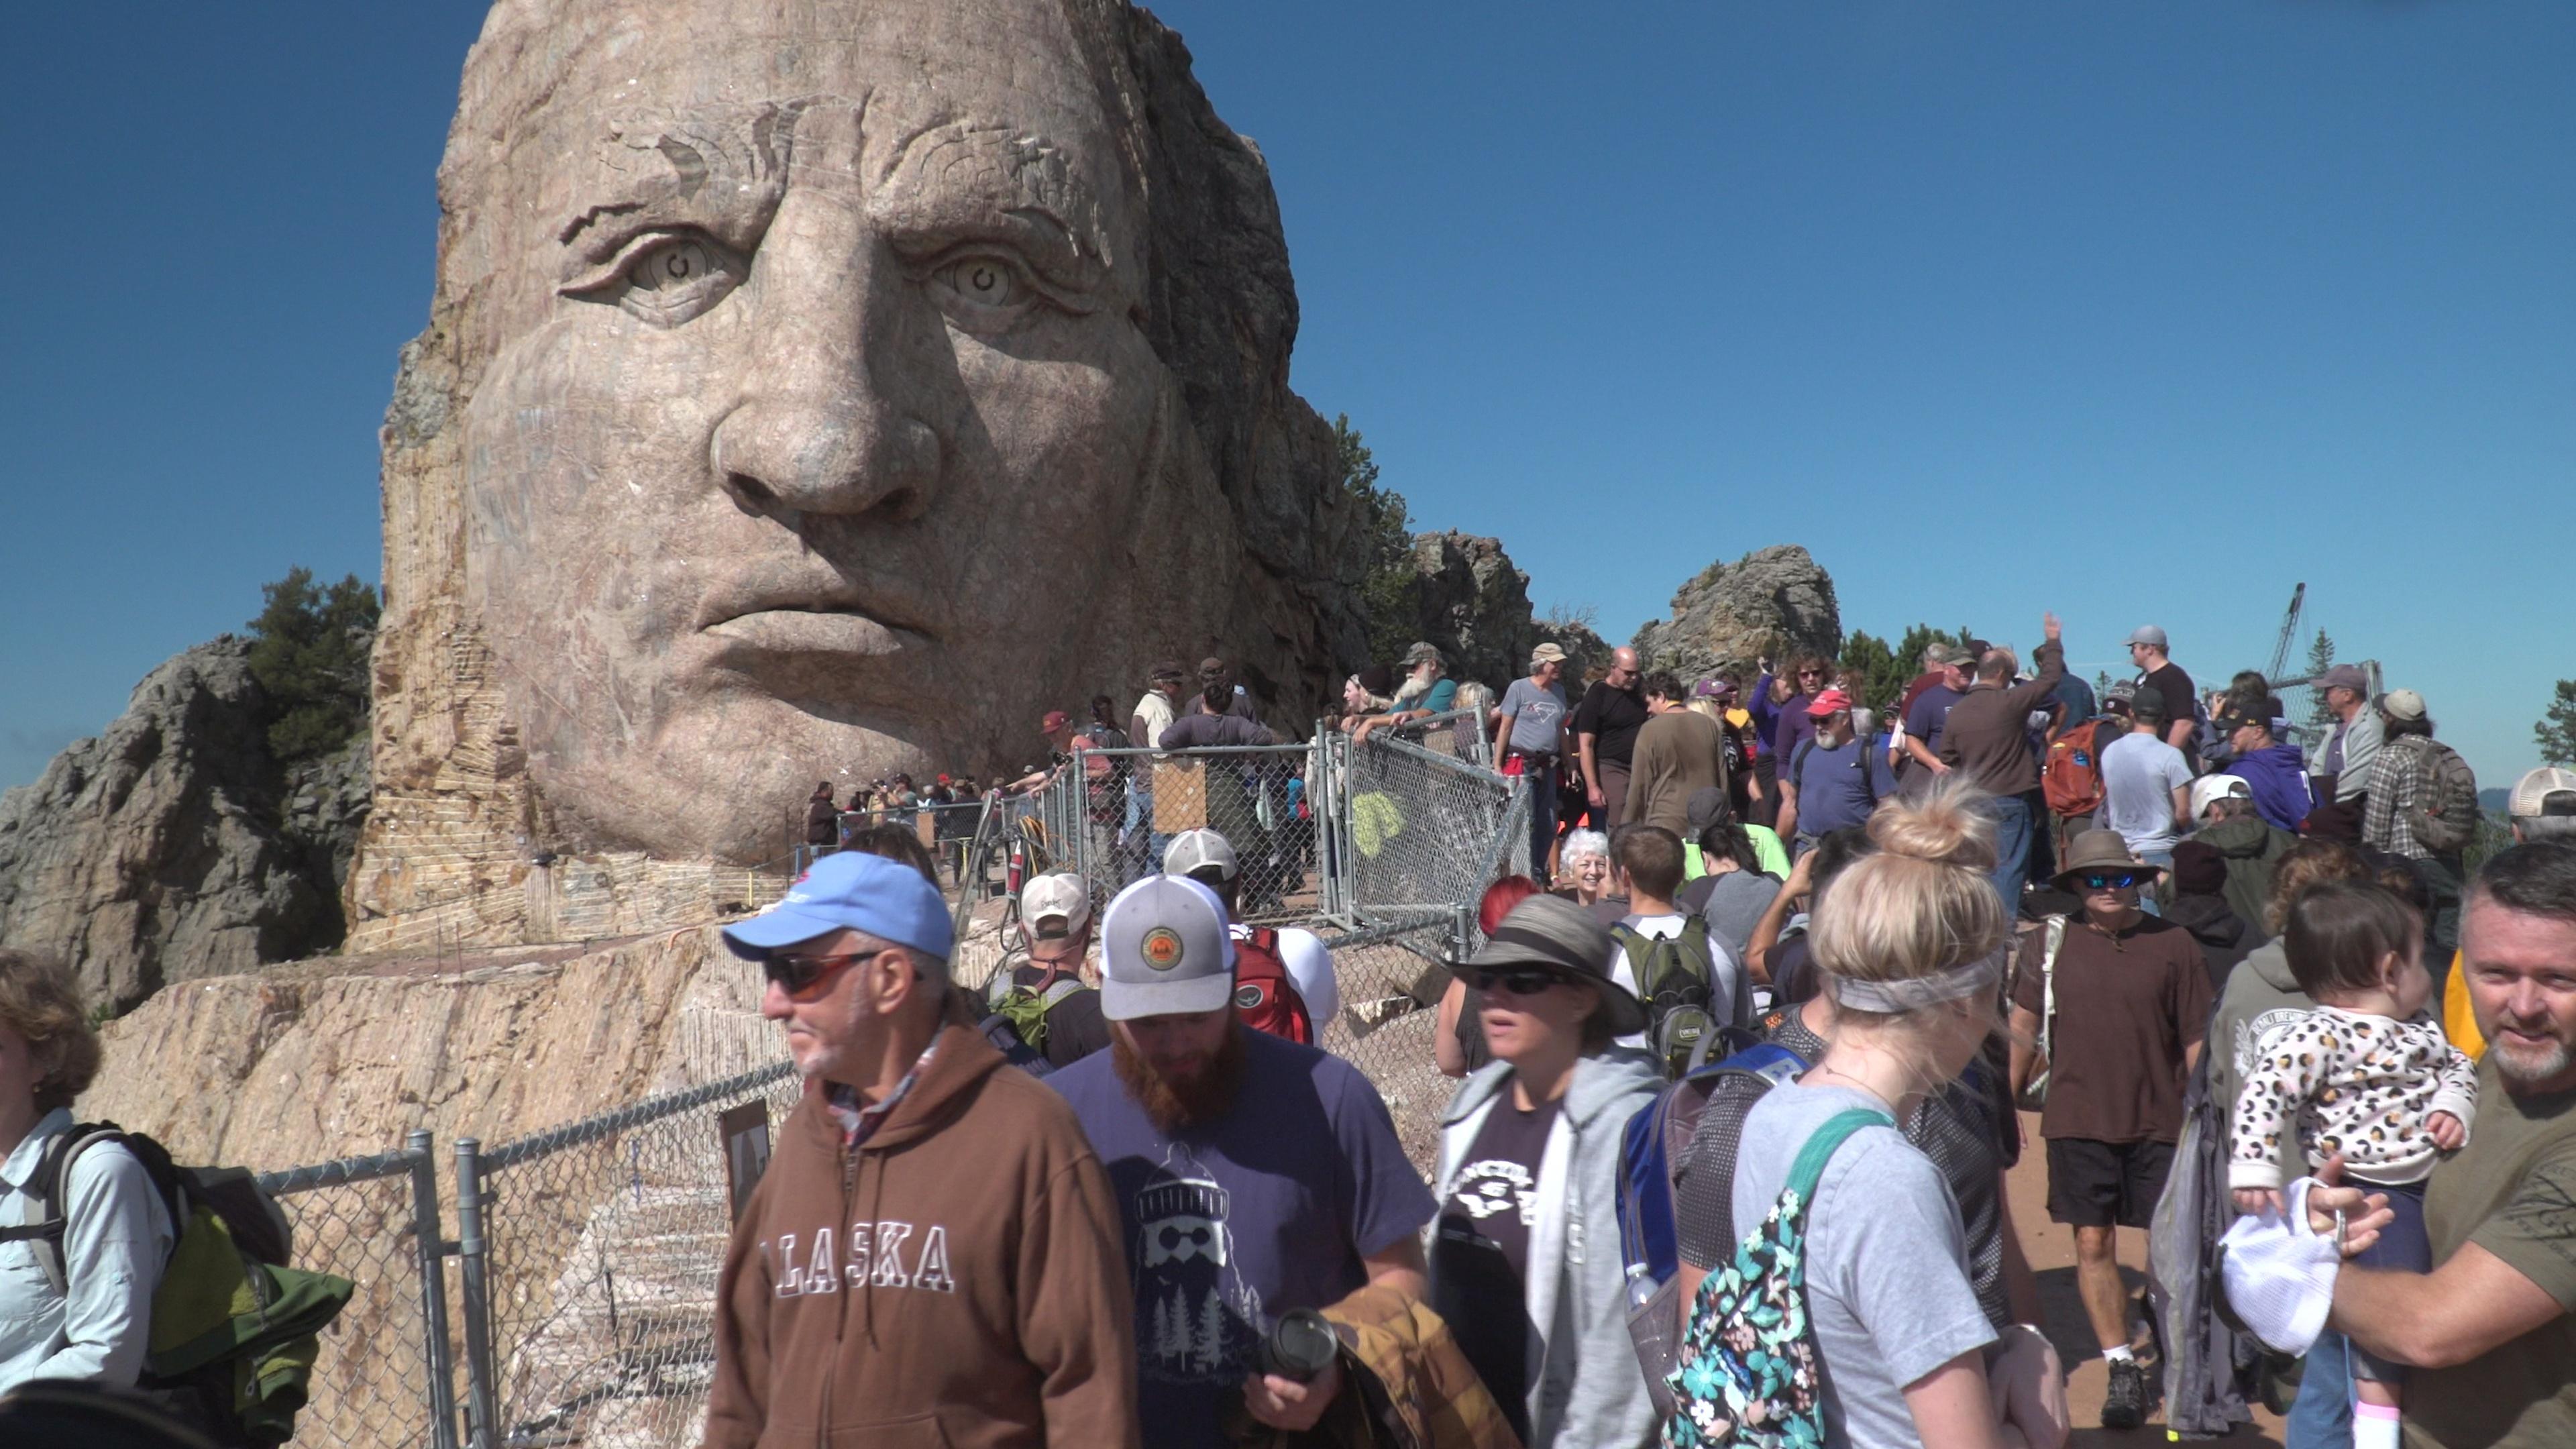 The 2019 Crazy Horse Fall Volksmarch